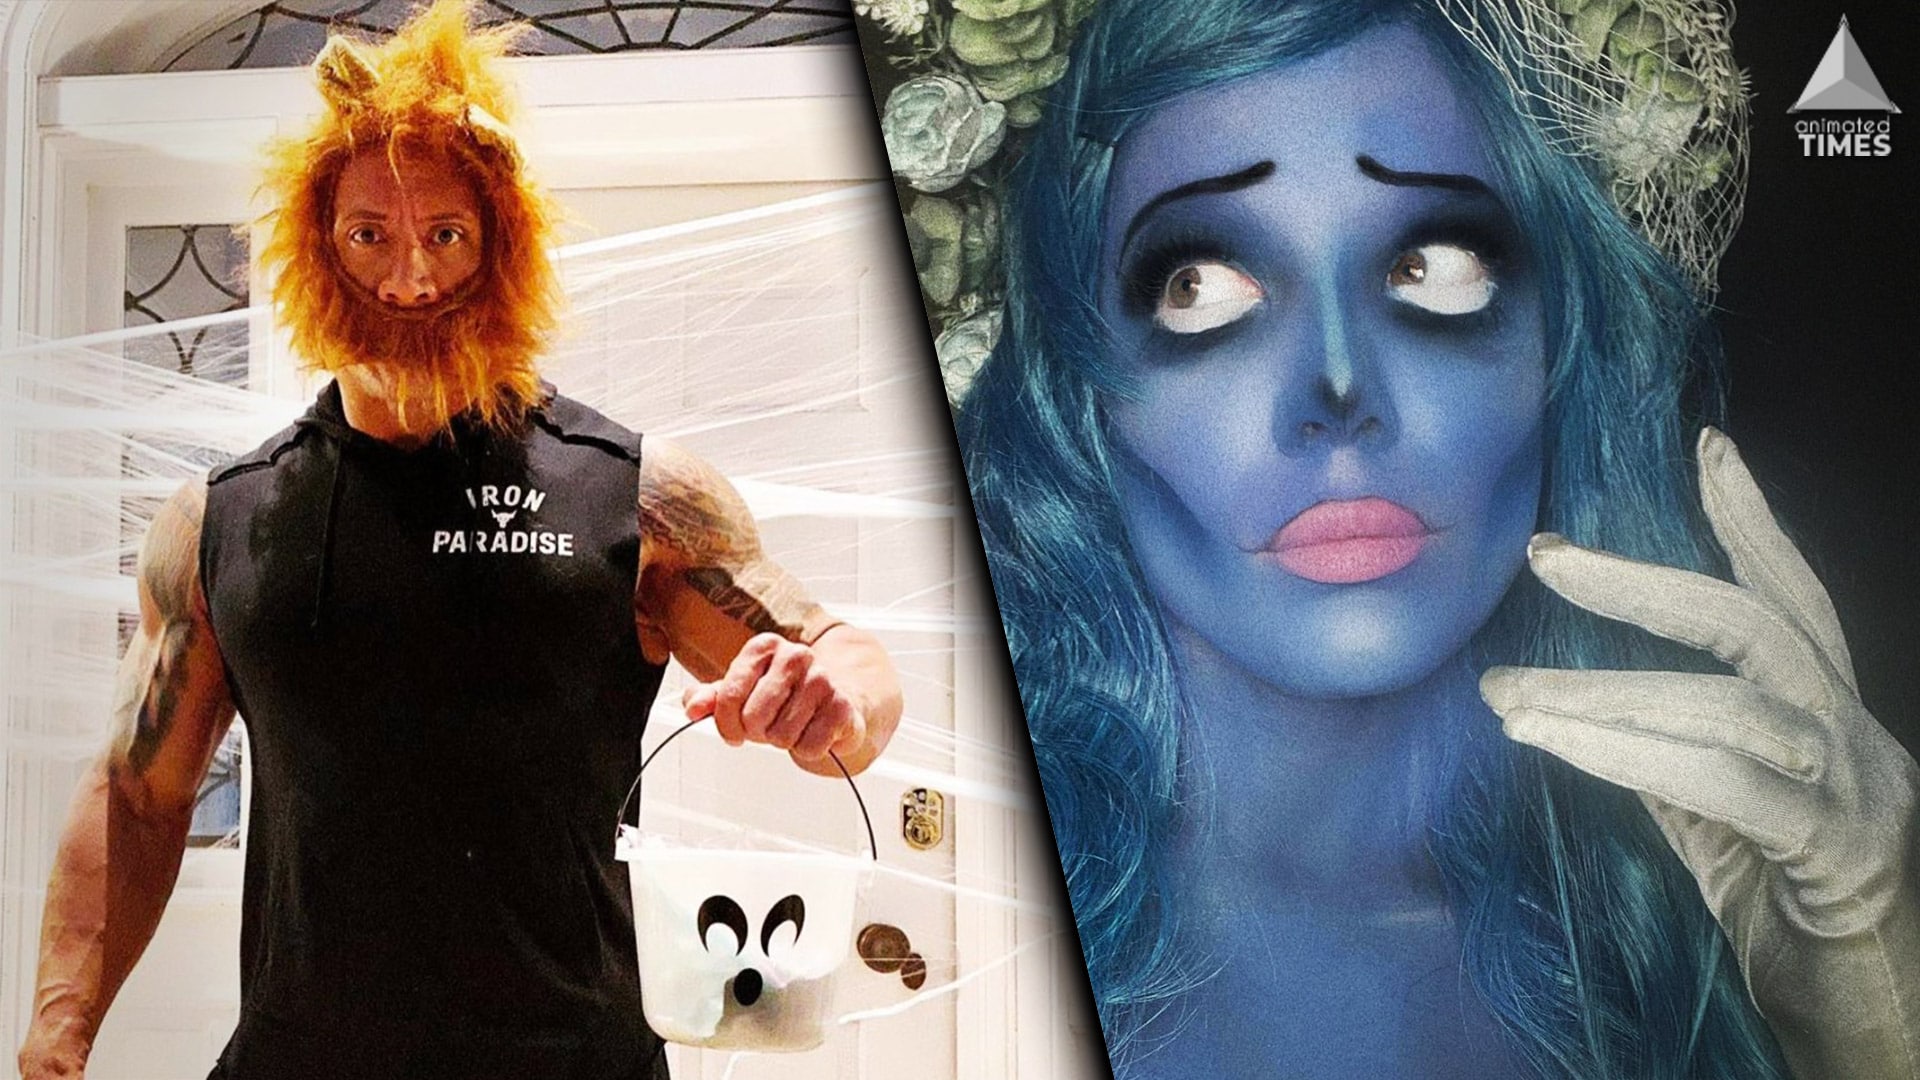 The Best Celebrity Costumes for Halloween 2020